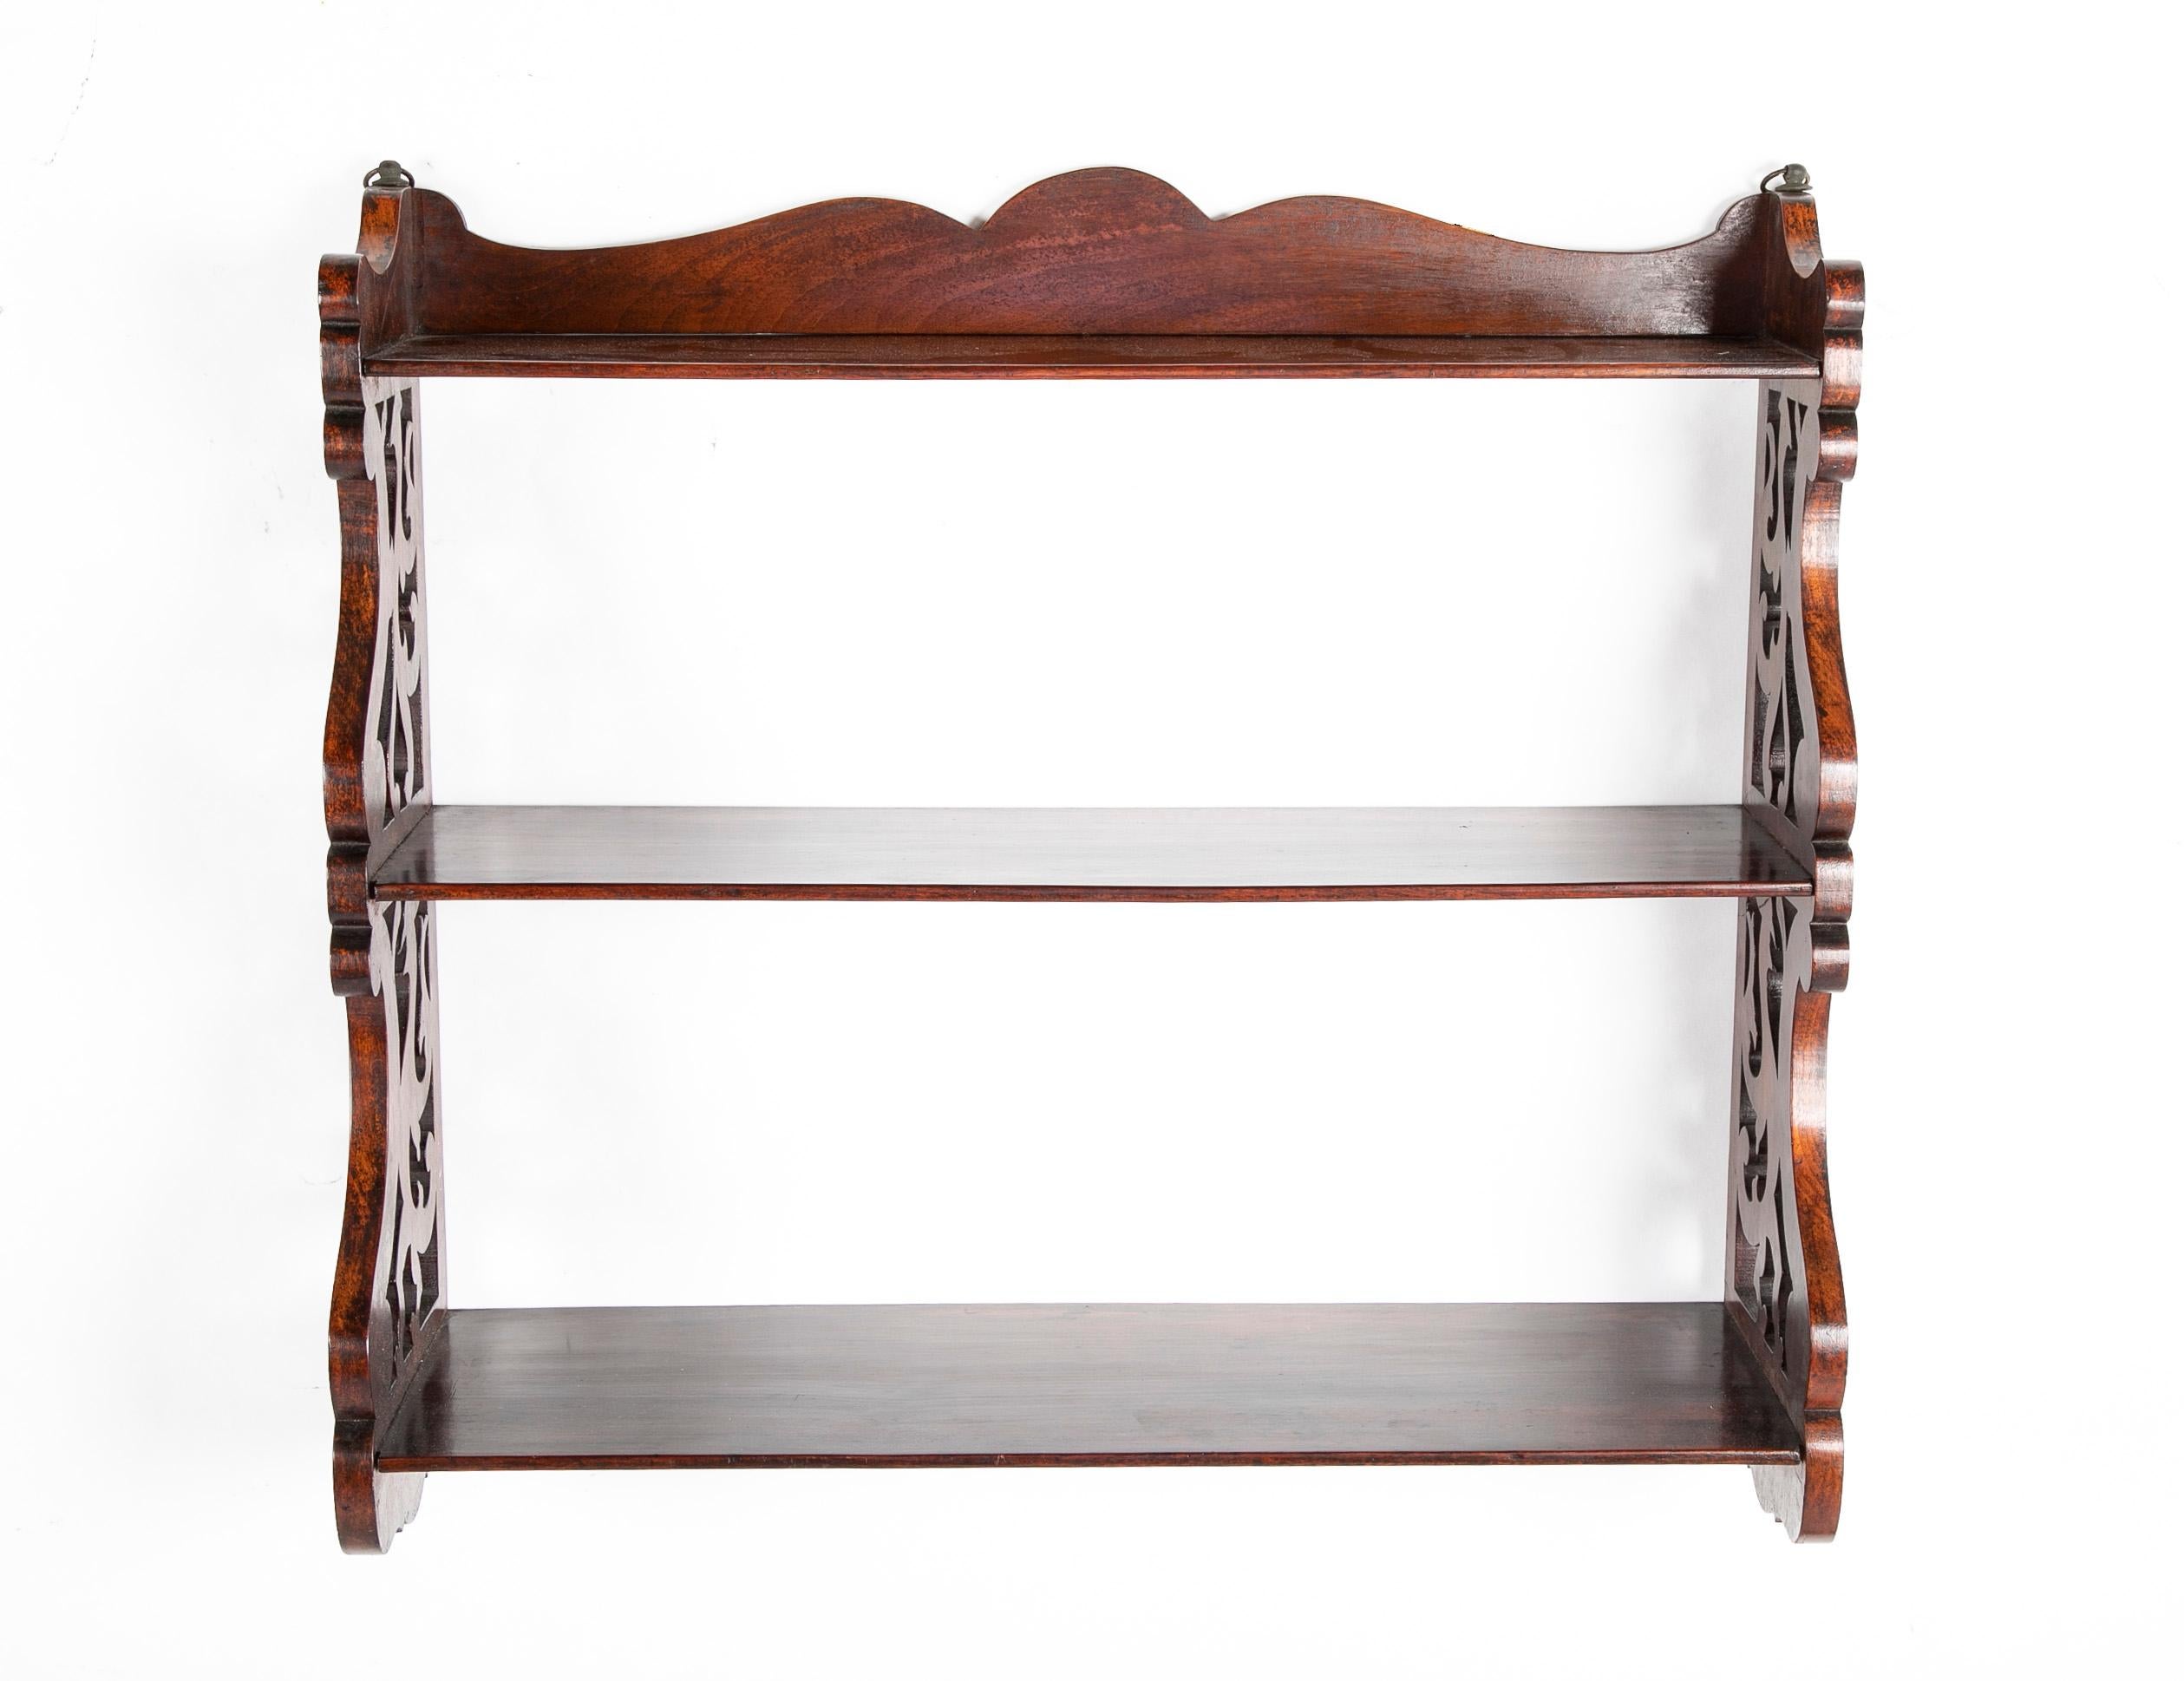 Hand-Carved 19th Century English Regency Carved Mahogany Hanging Shelf For Sale